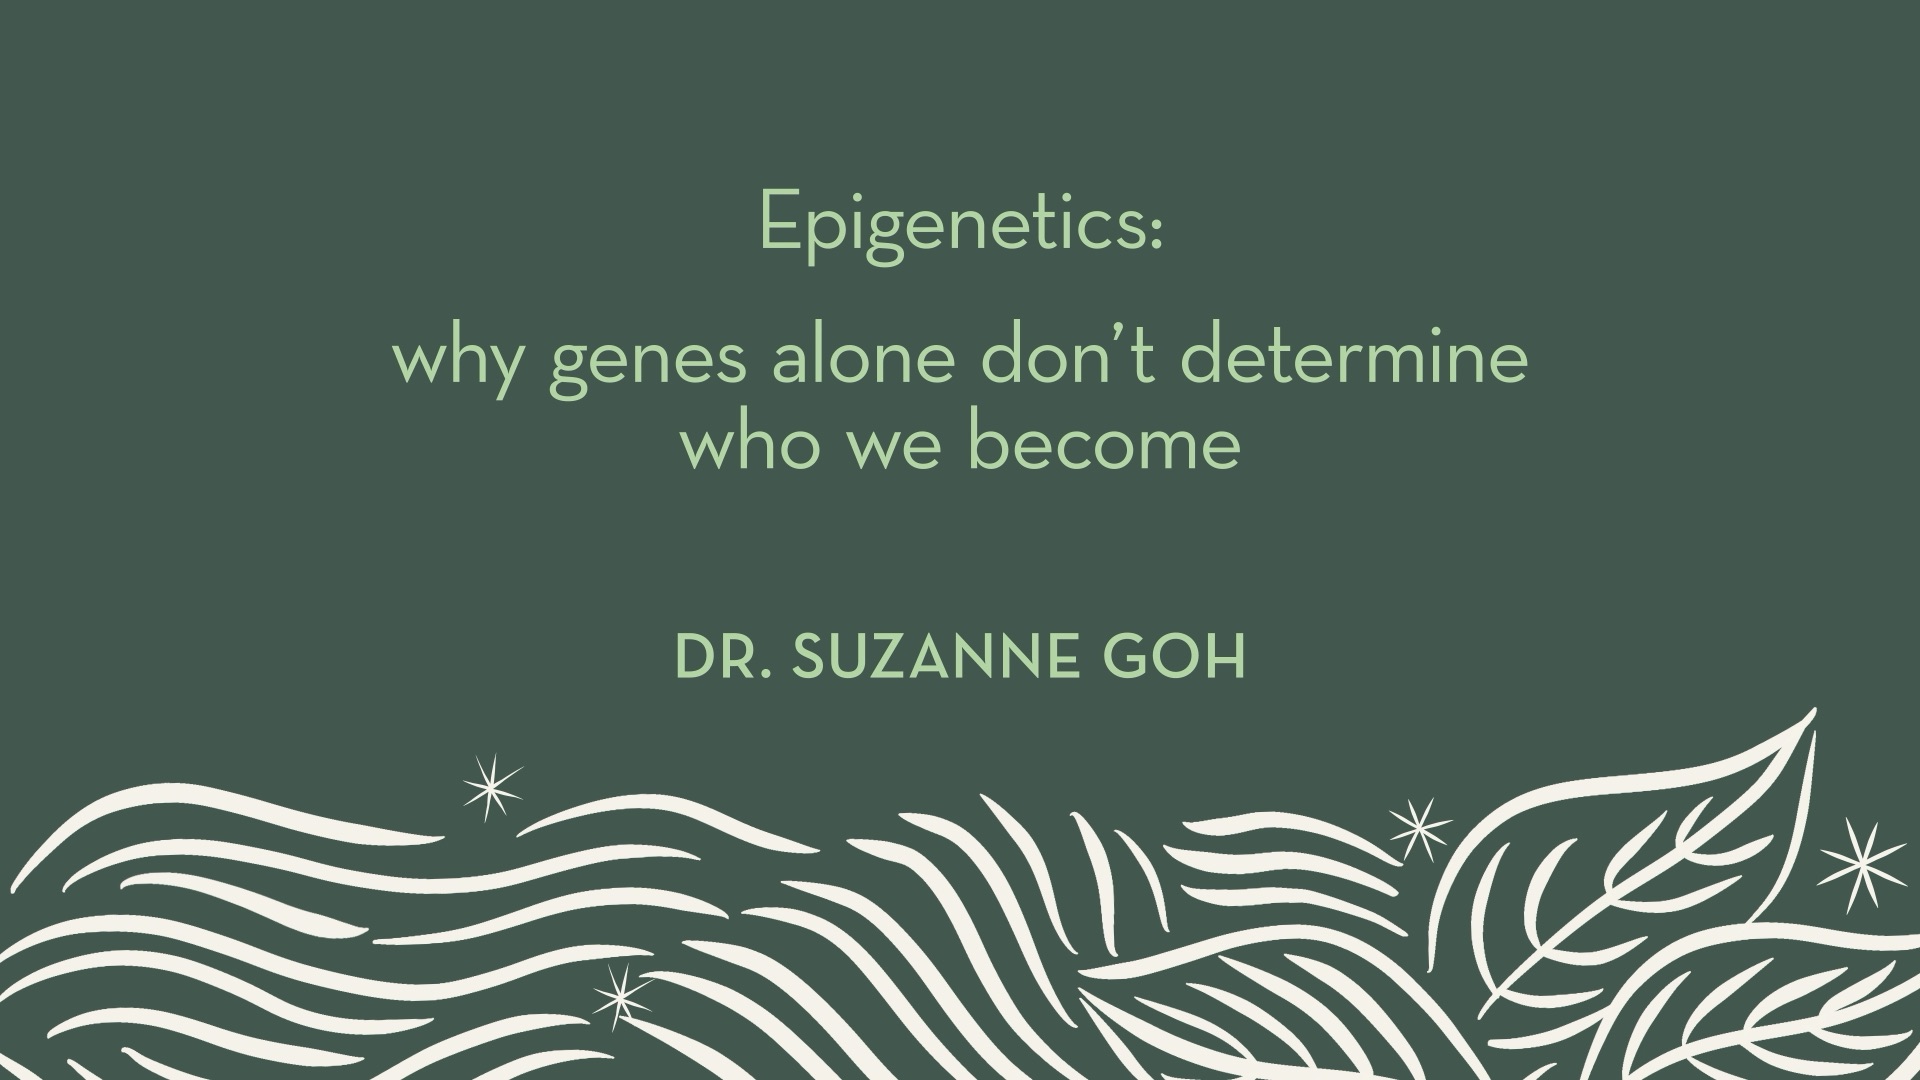 Dr. Goh | Epigenetics: why genes alone don't determine who we become